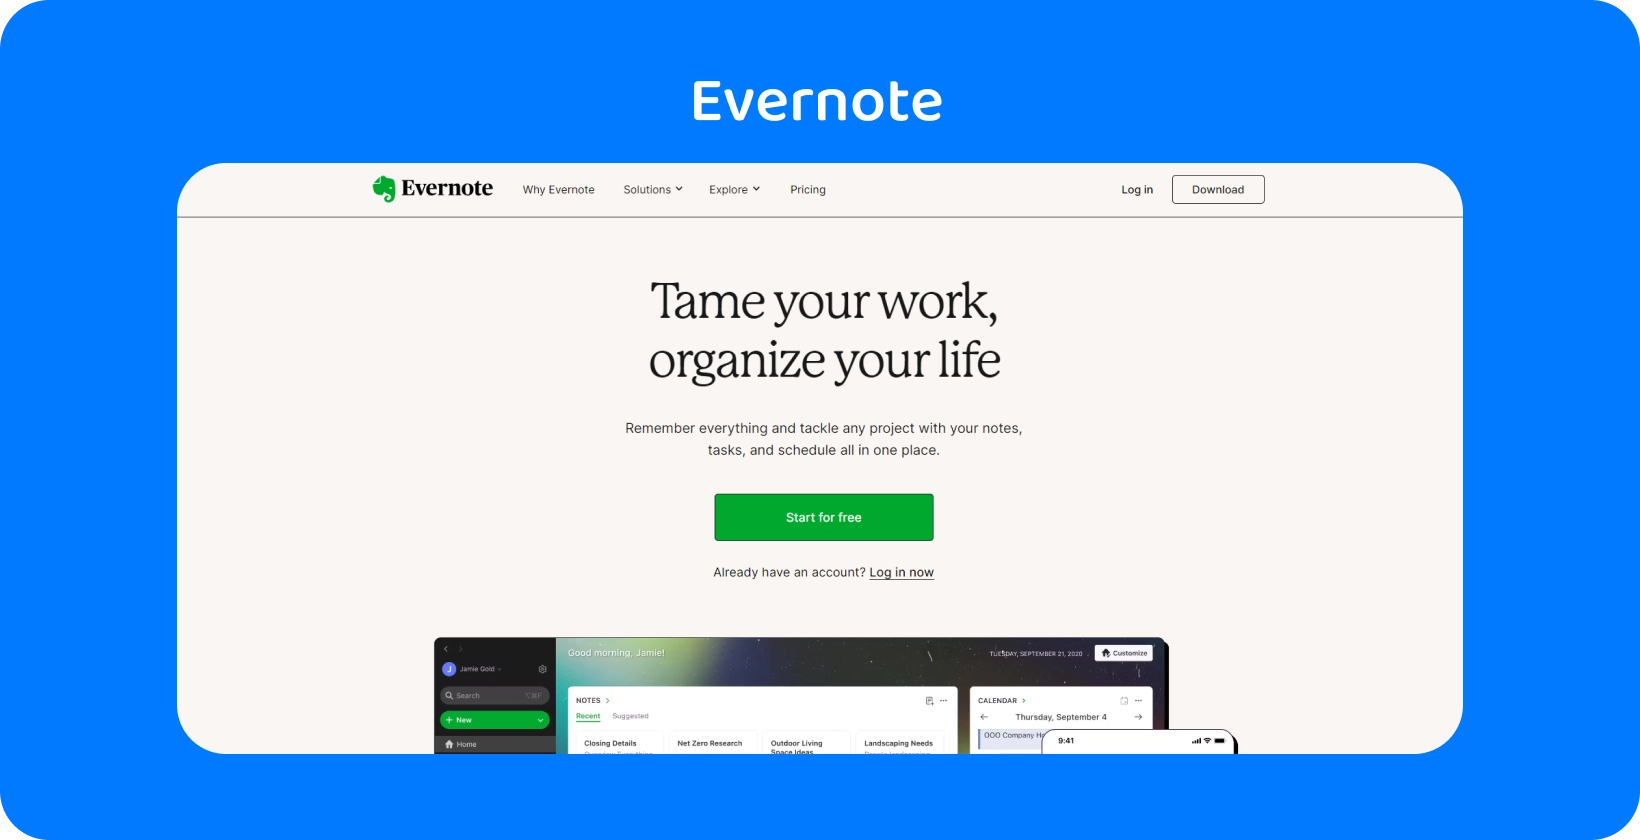 Evernote homepage highlighting organization features, akin to our app's meeting transcription for lawyers.